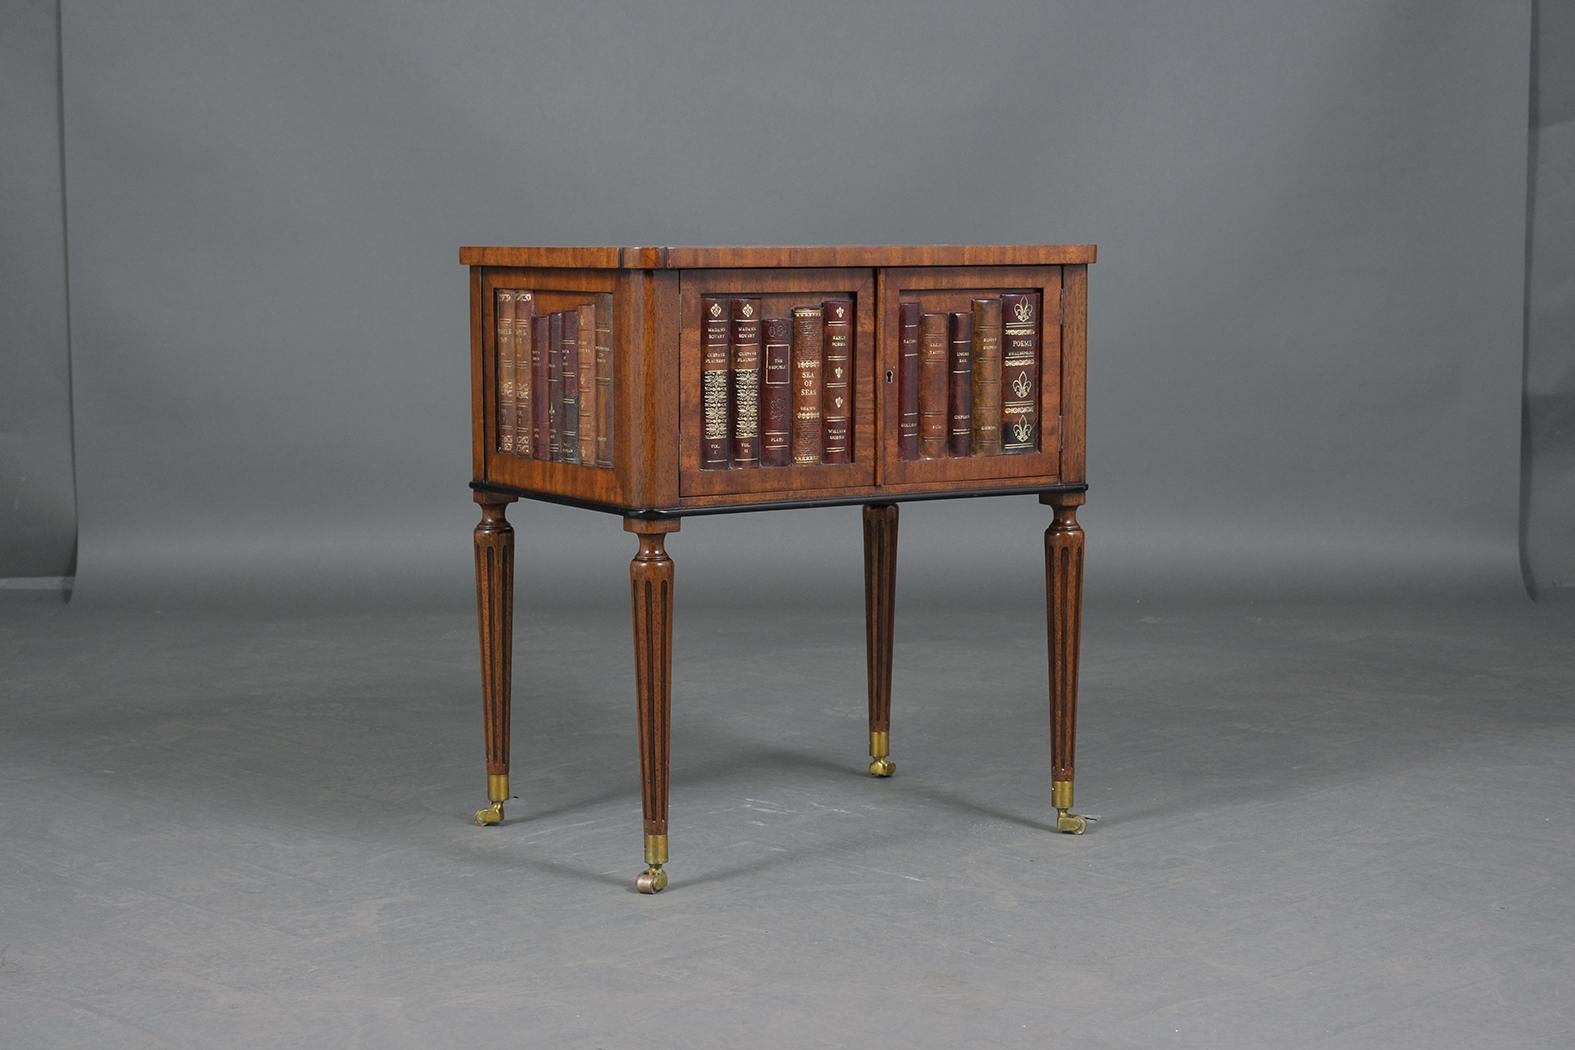 Lacquer Restored English Mahogany Commode with Embossed Leather Top & Faux Book Design